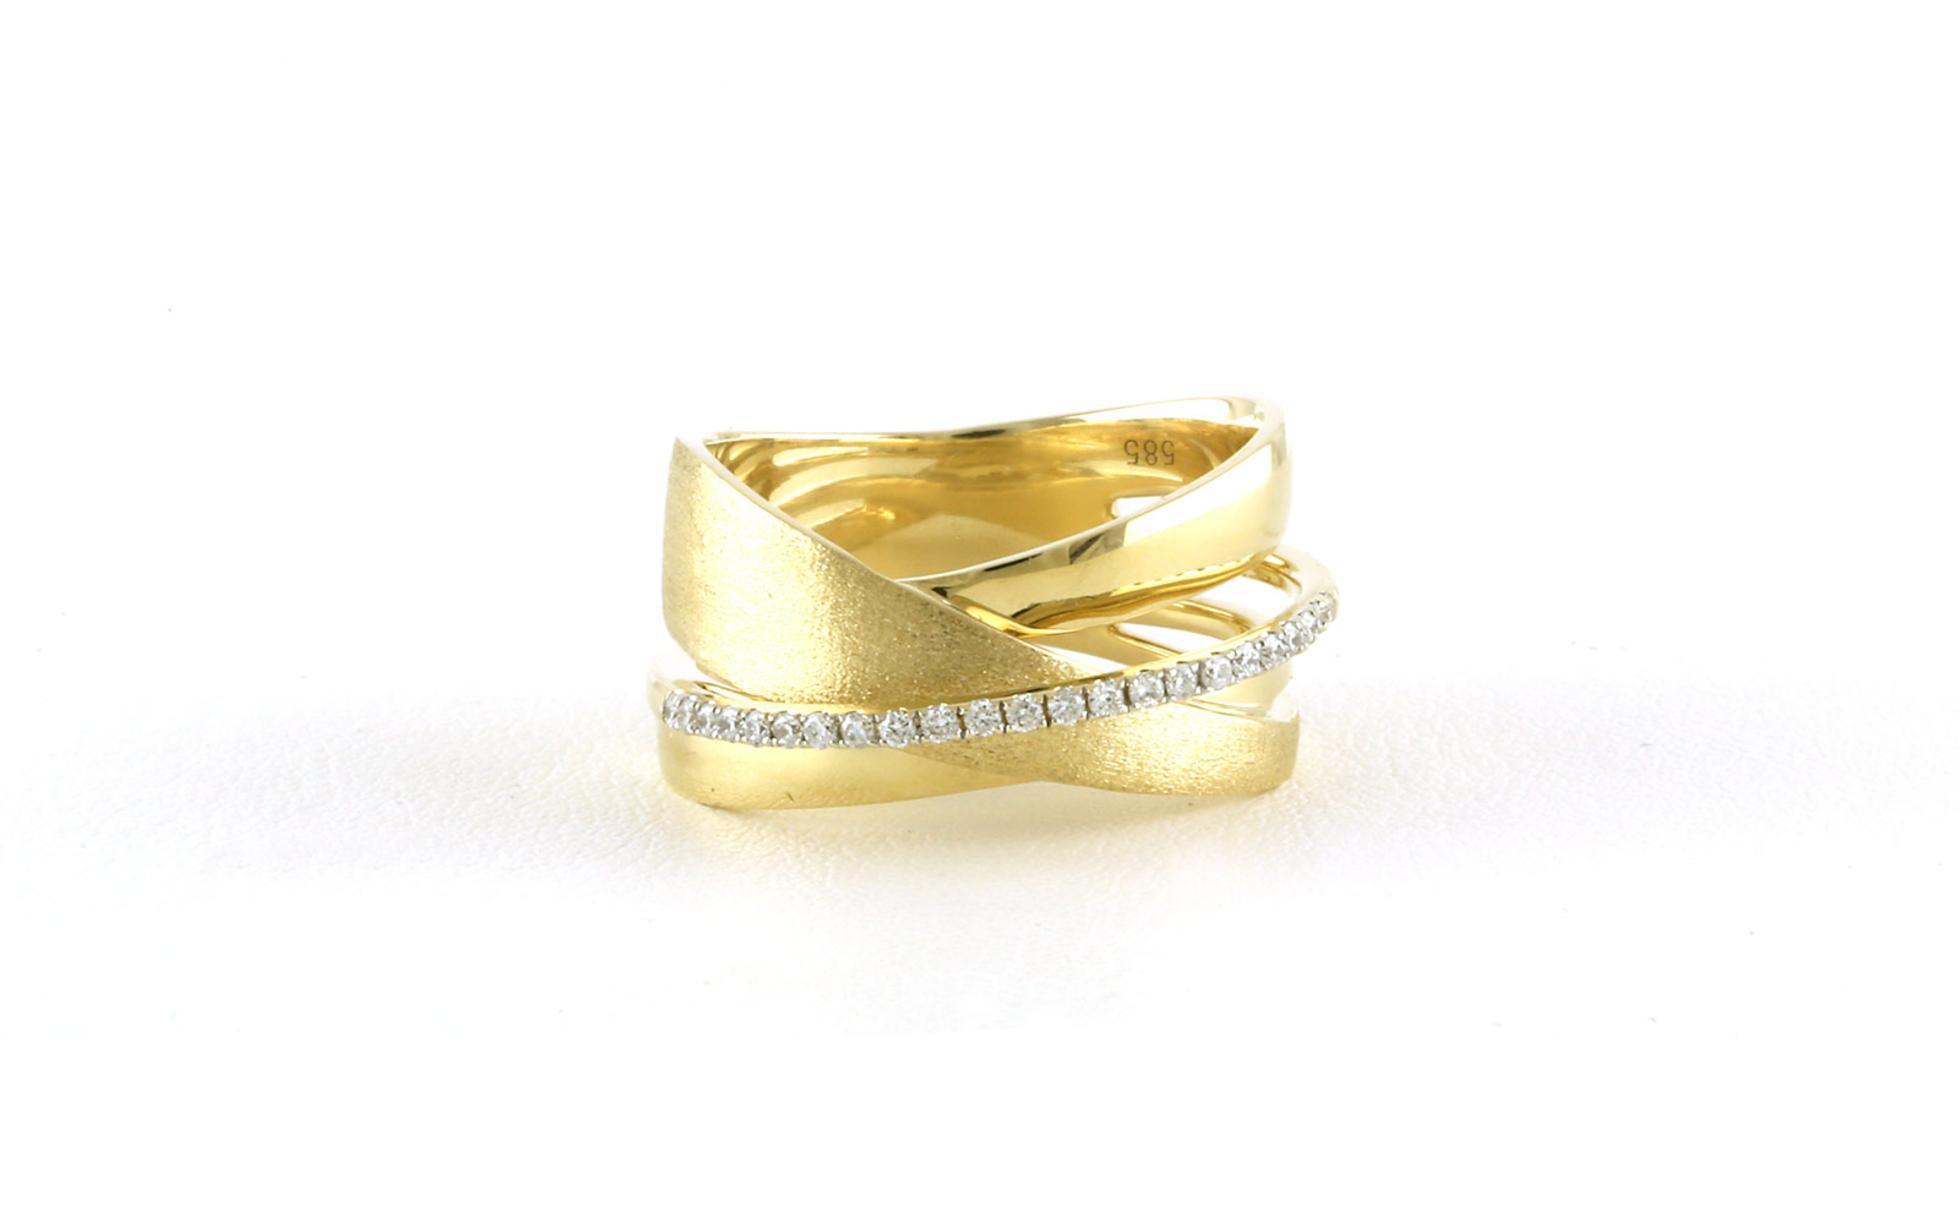 Wide Cross Over Diamond Ring with Satin and Polished Finishes in Yellow Gold (0.14cts TWT)